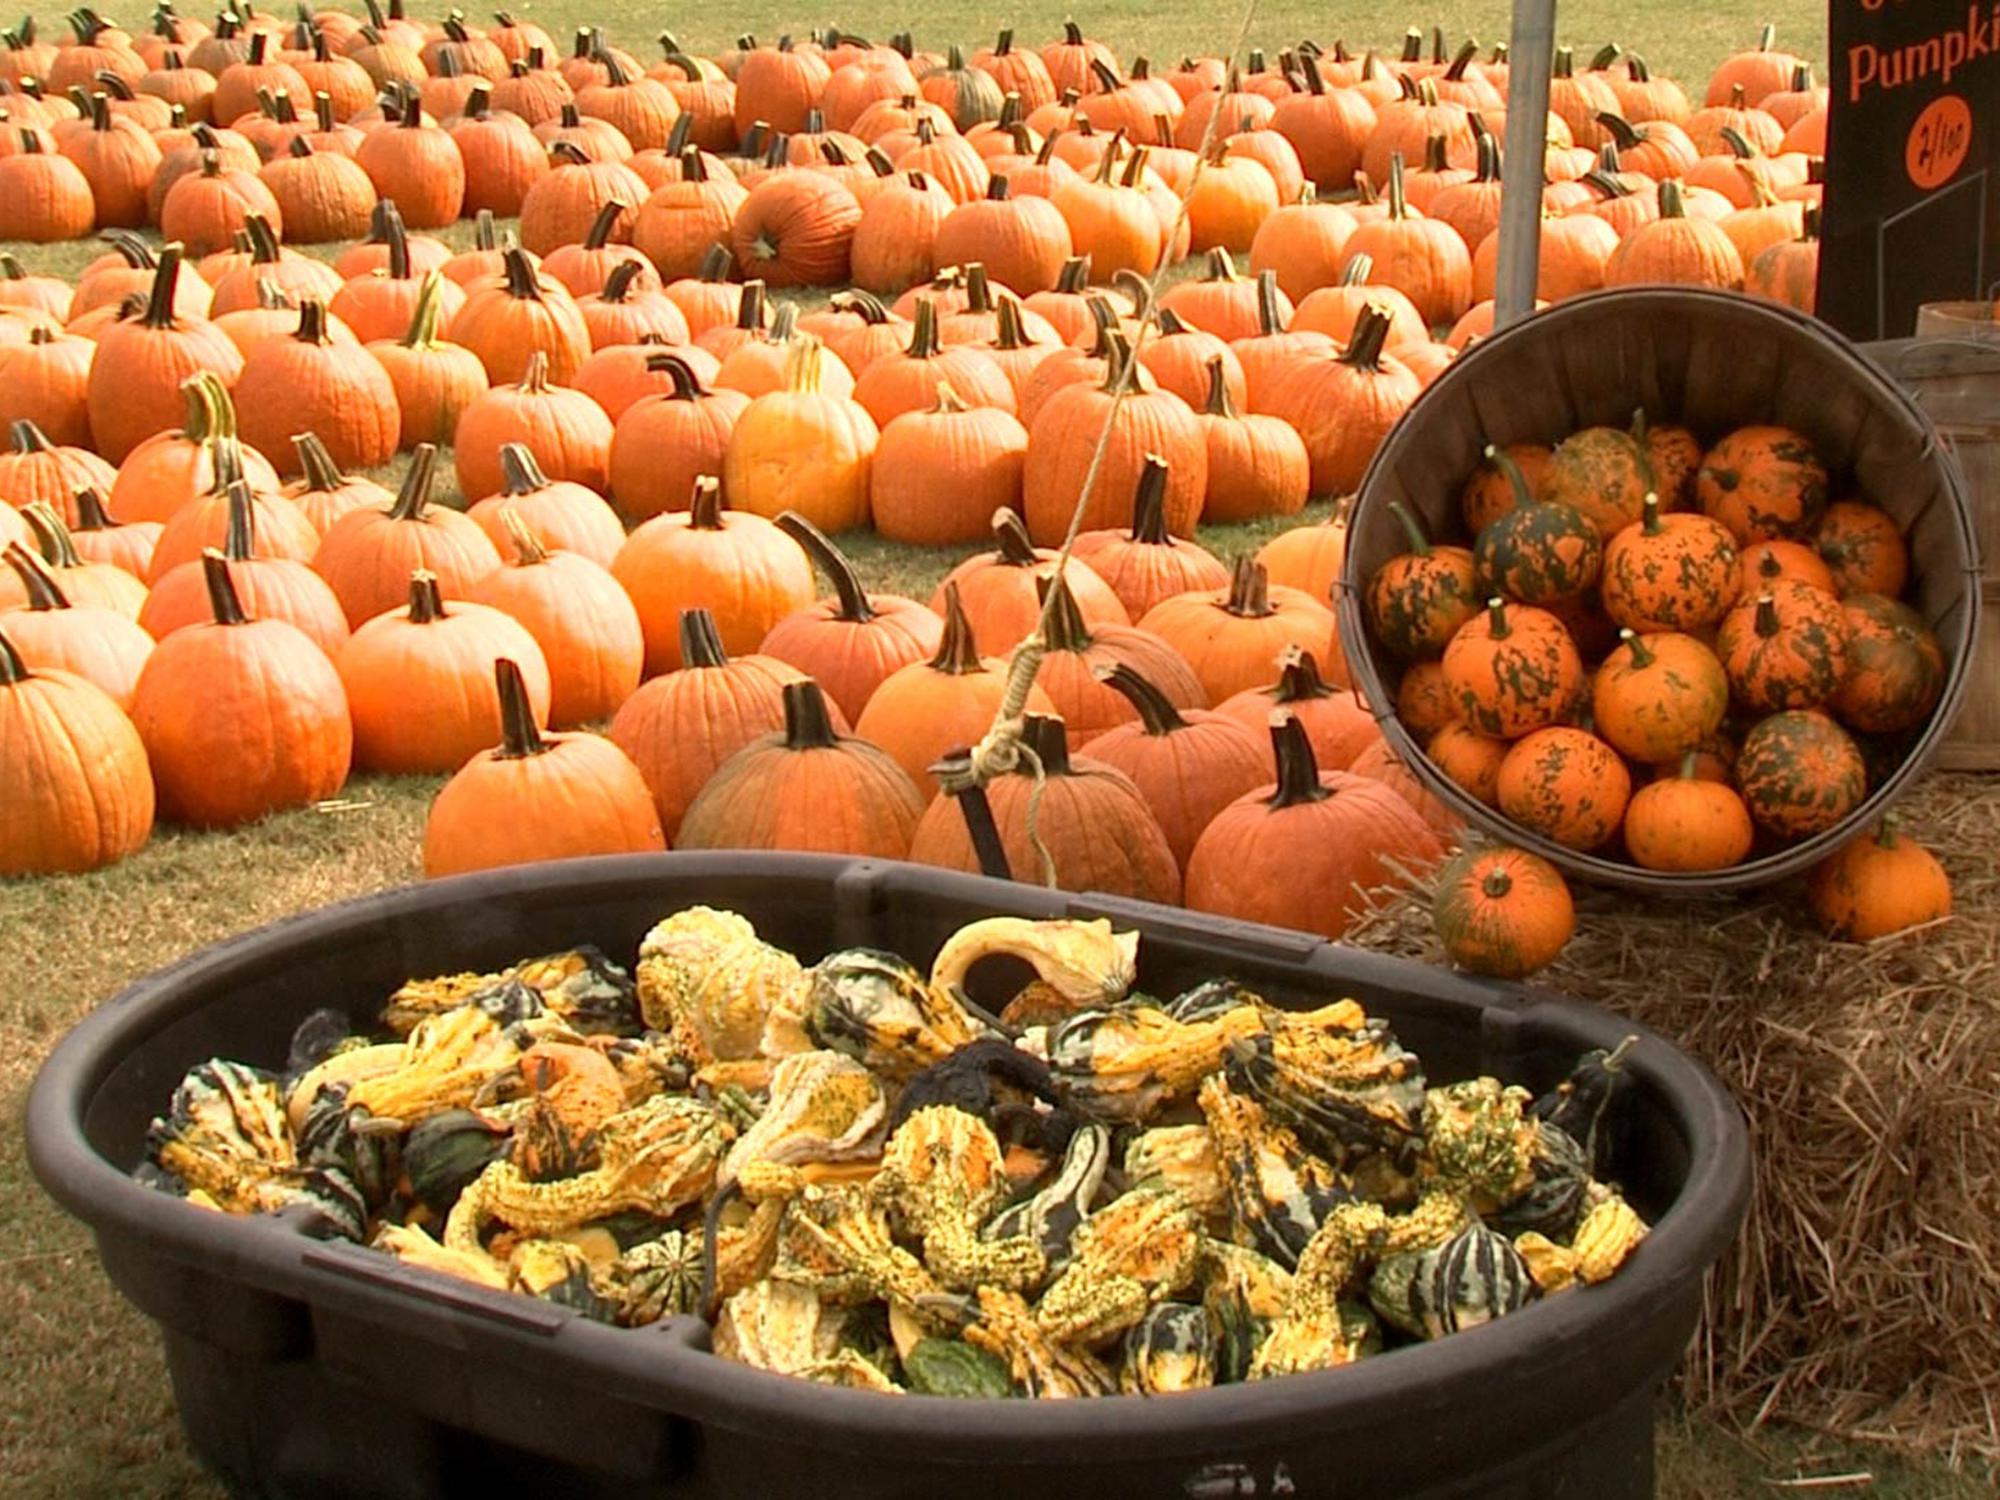 Country Pumpkins in Caledonia, Miss., has more than 80 varieties of pumpkins, squash and gourds after one of the best growing seasons in decades. The Lowndes County farm is one of a growing number of agritourism sites in the state. (Photo by MSU Ag Communications/Tim Allison)